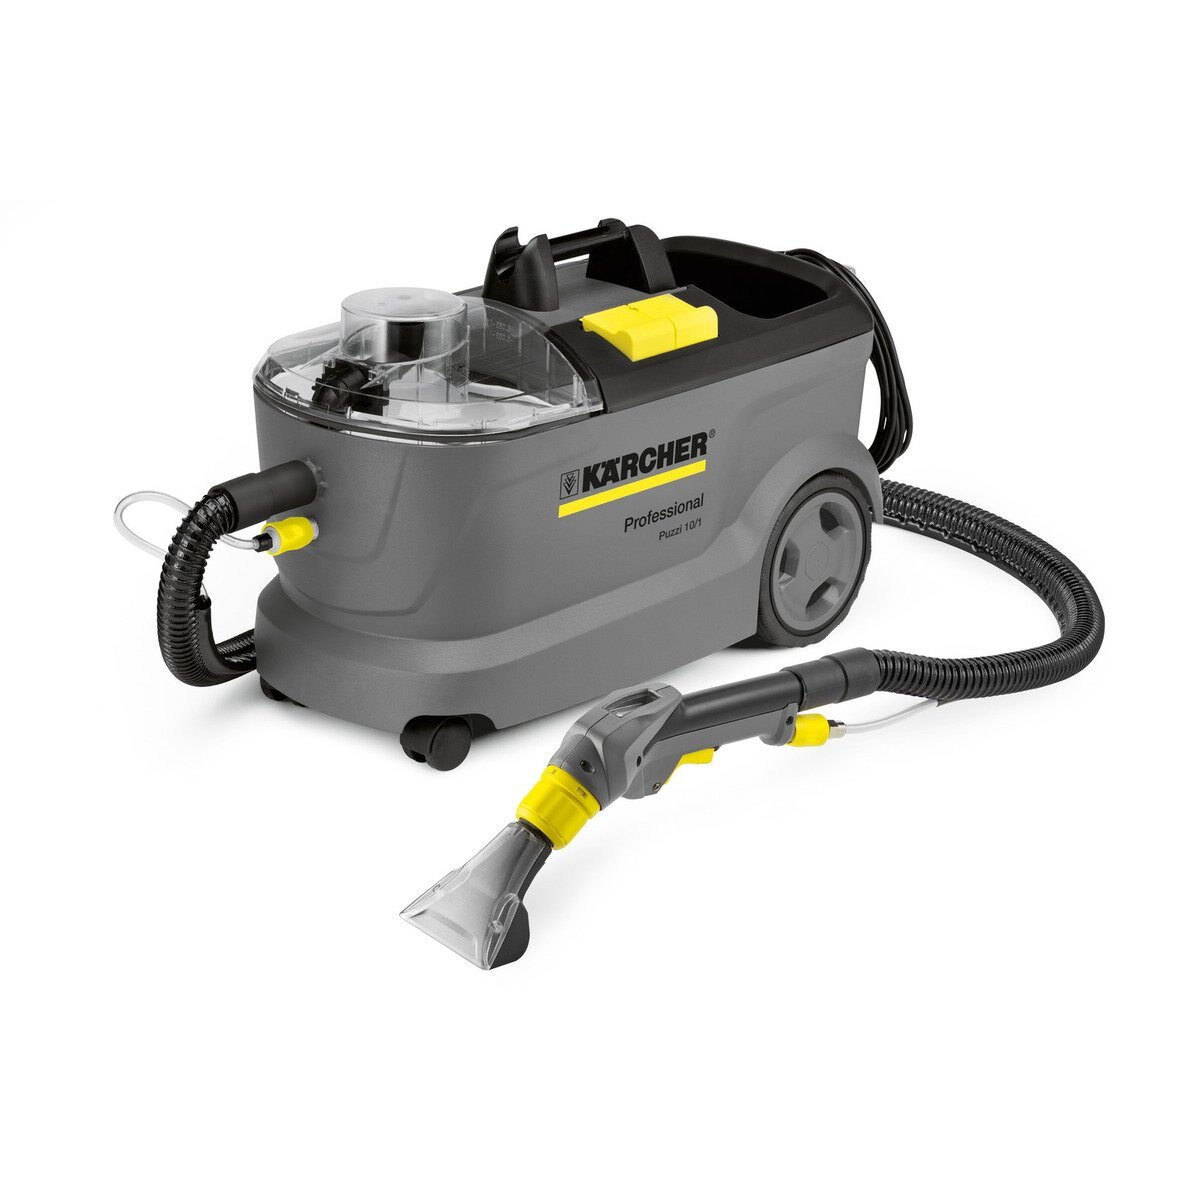 Karcher SPRAY EXTRACTION CLEANER Puzzi 10/1